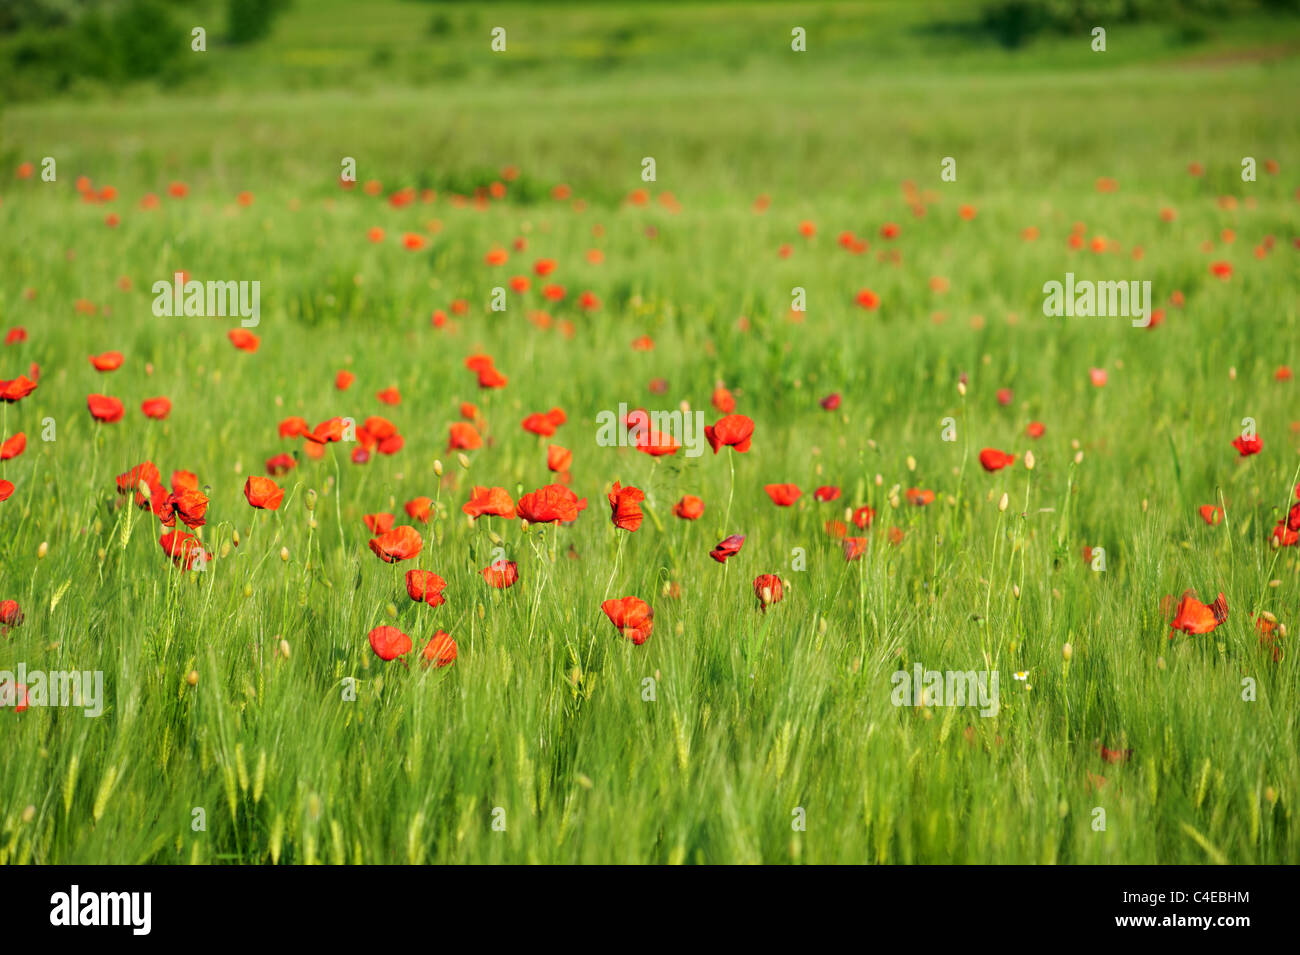 Red poppies on green wheat field in a windy day. Shallow DOF. Stock Photo